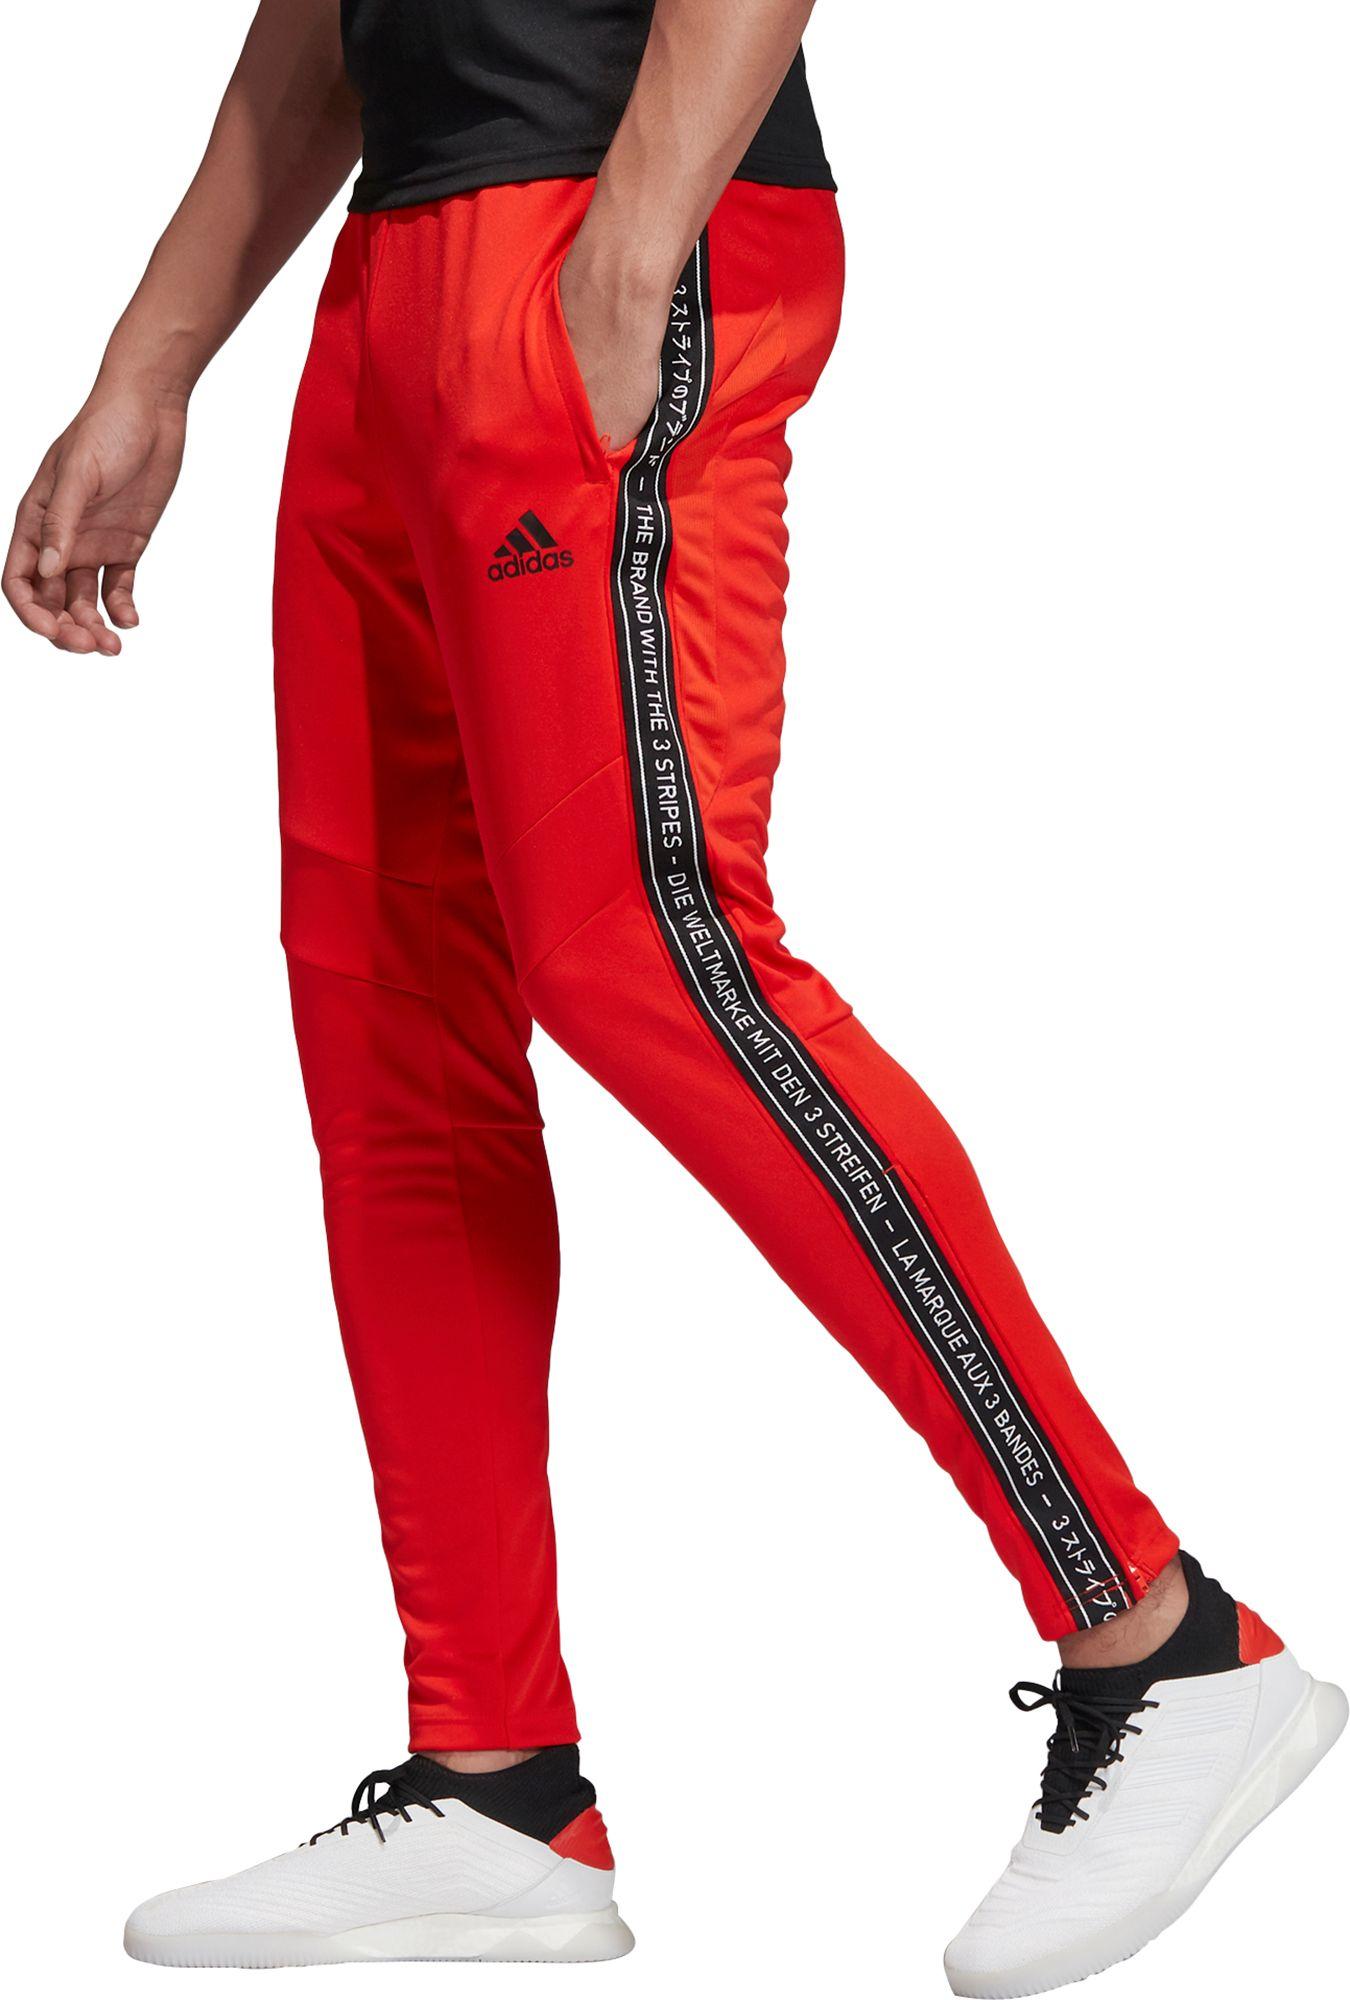 Adidas Synthetic Tiro 19 Taped Training Pants In Red For -5352